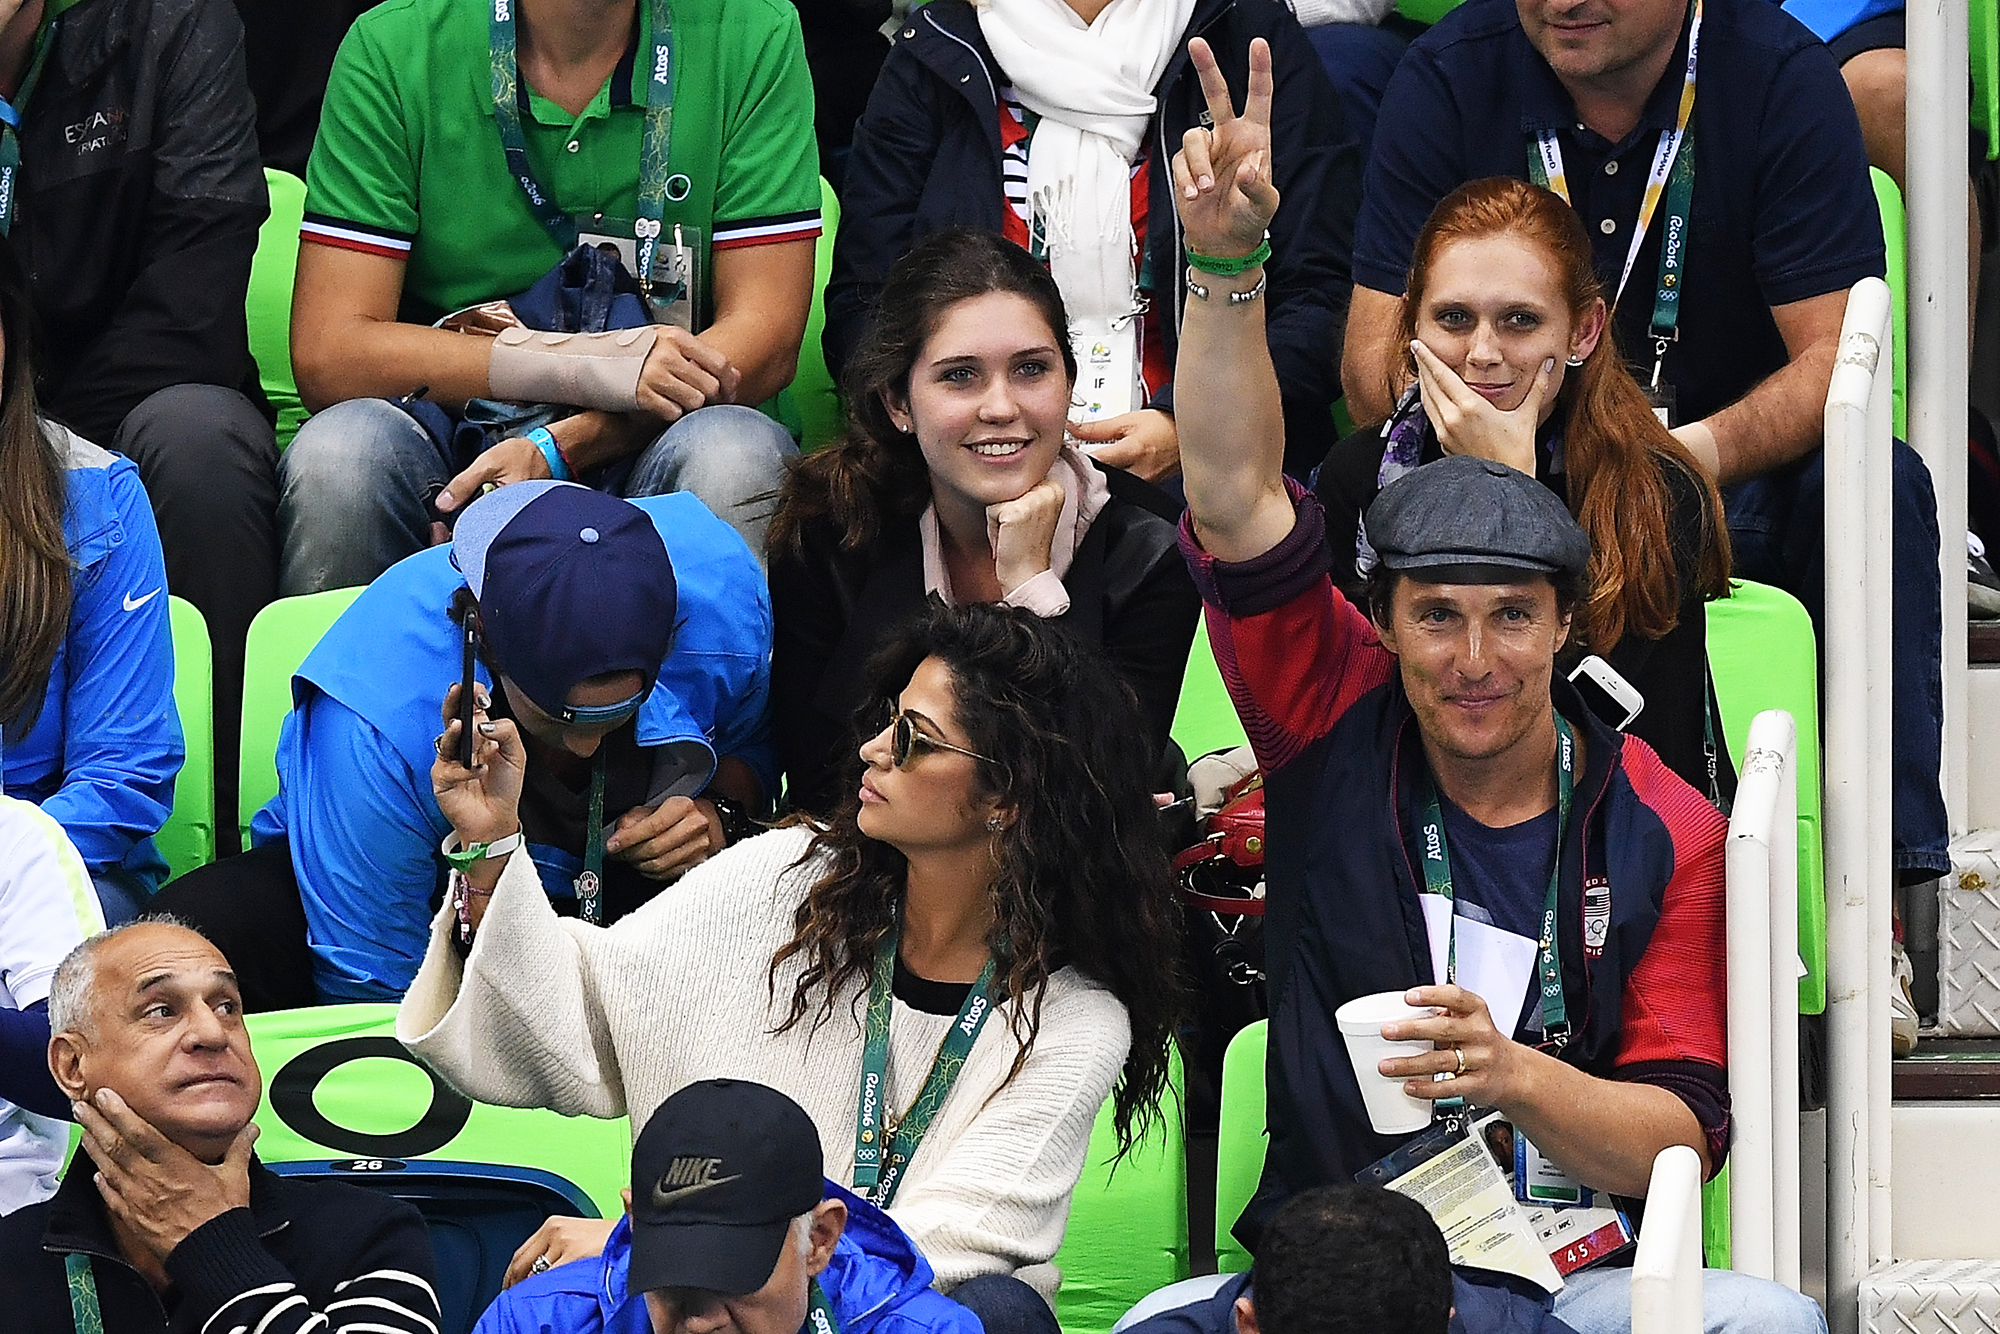 Matthew McConaughey and Camilla Alvez attend the swimming semifinals and finals on Day 5 of the Rio 2016 Olympic Games, on Aug. 9, 2016 in Rio de Janeiro, Brazil.